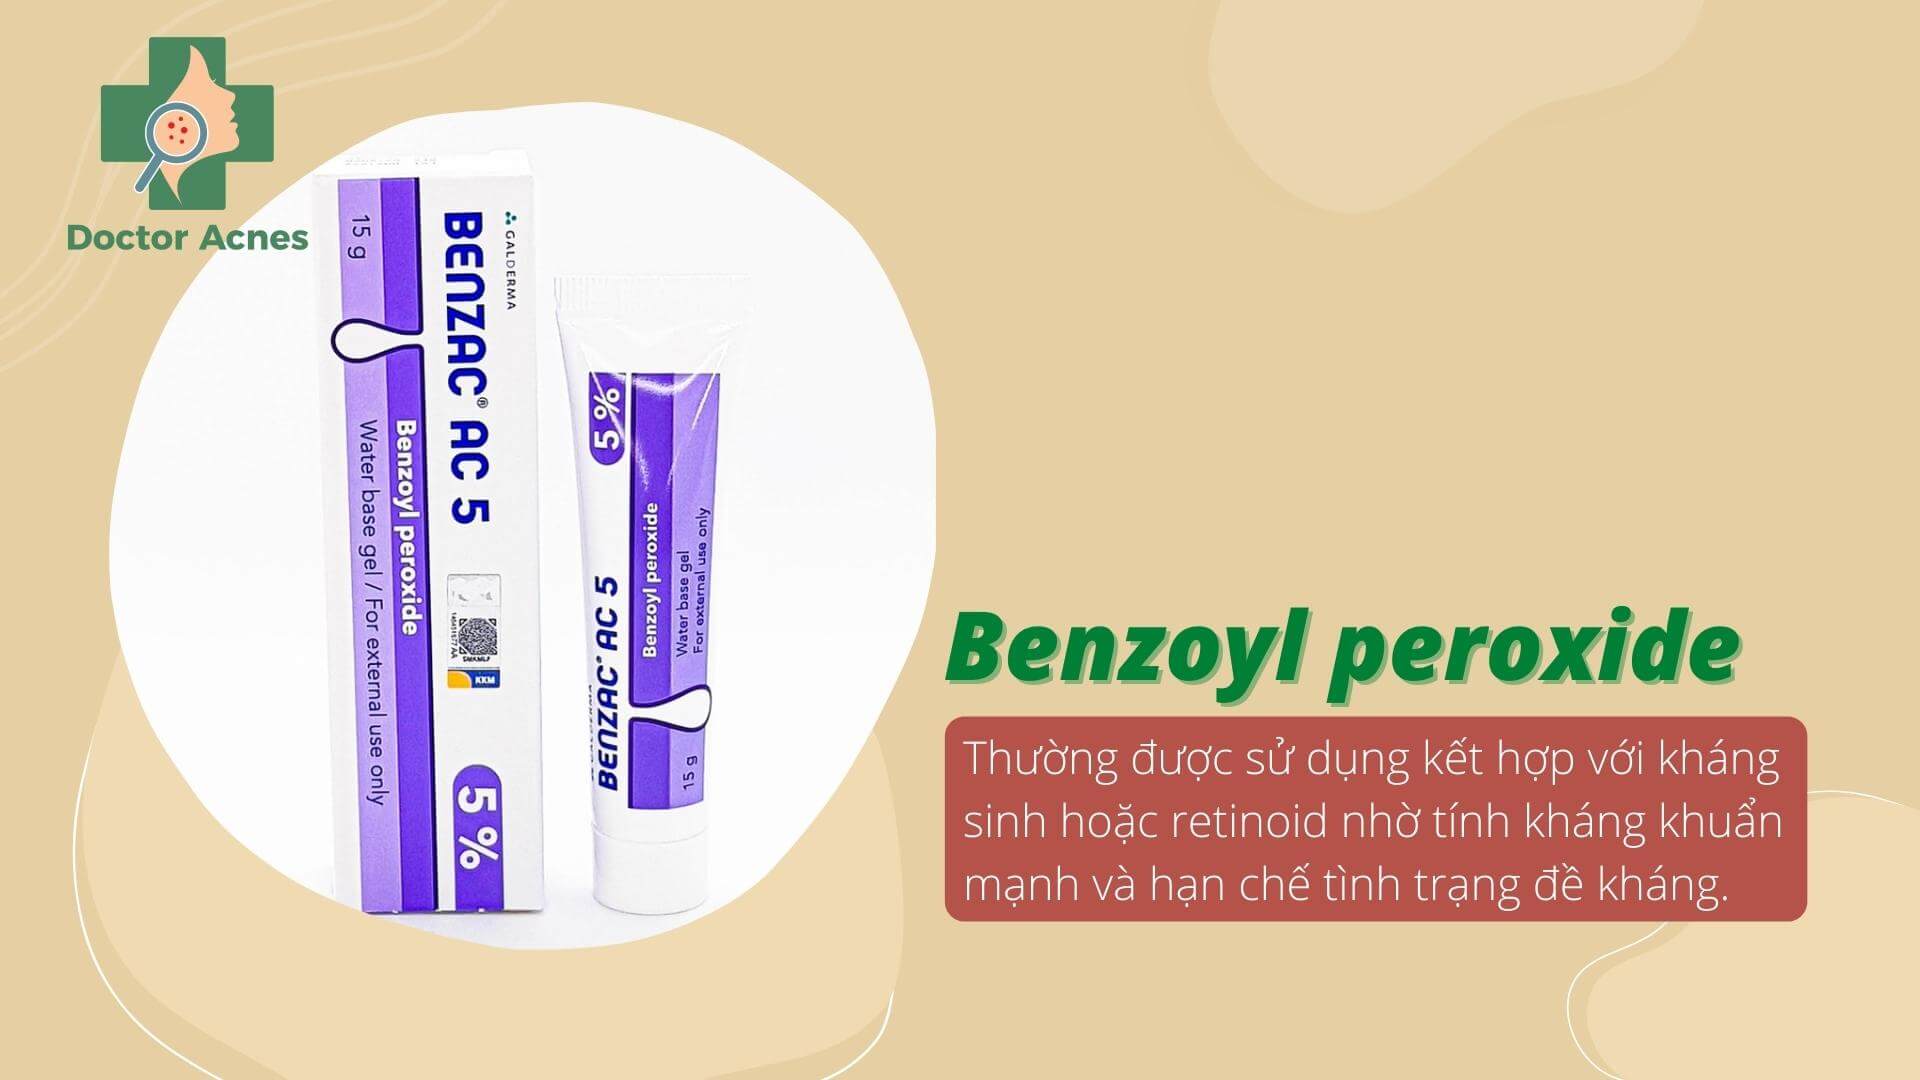 Benzoyl peroxide - Doctor Acnes